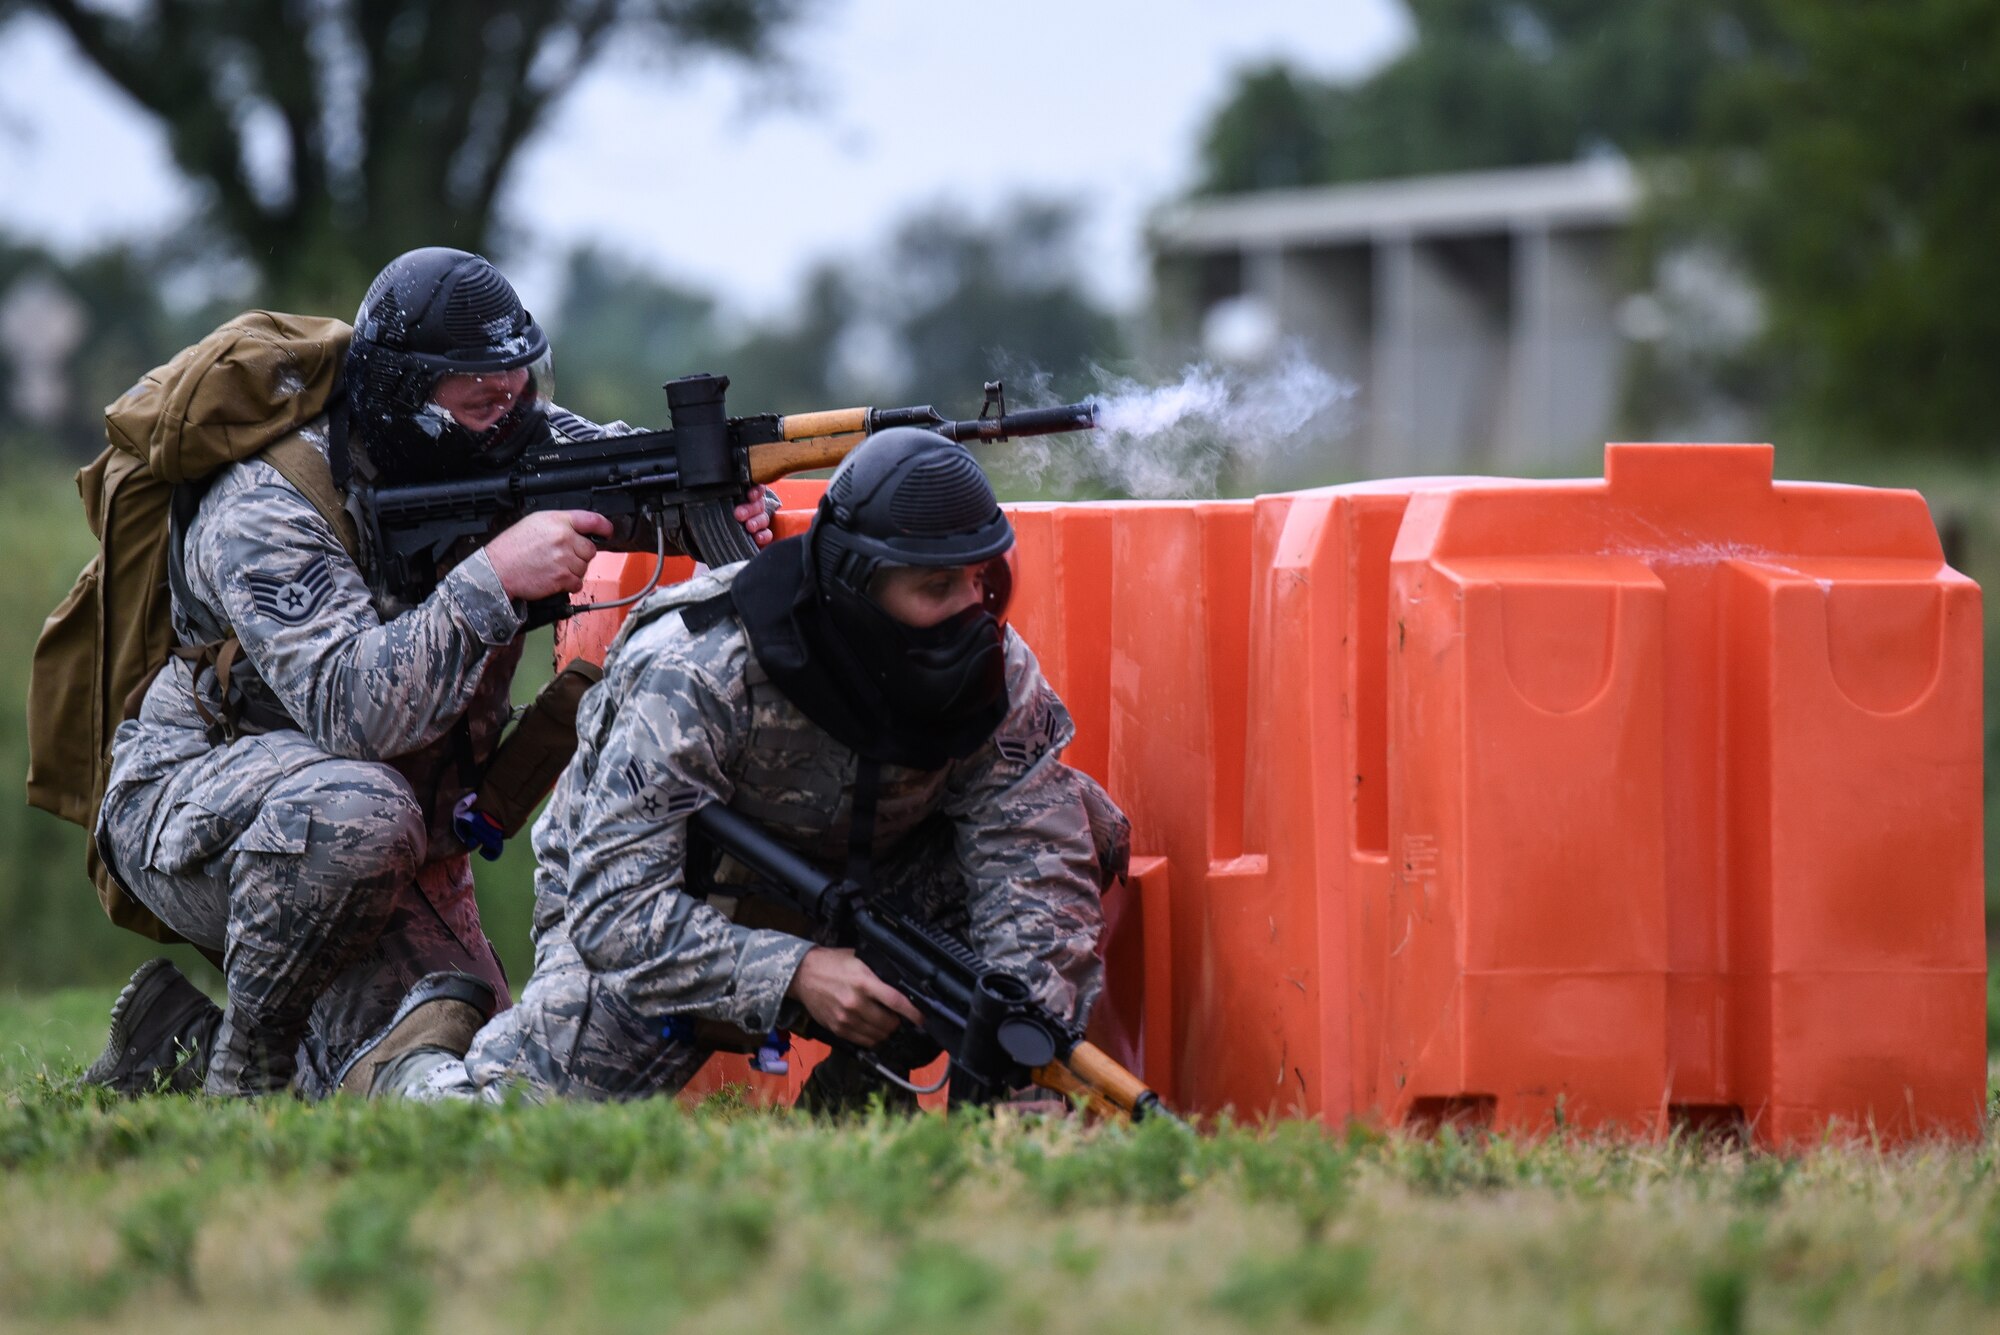 Staff Sgt. Aaron Wooton, 22nd Aerospace Medicine Squadron operational medical technician, and Airman 1st Class Ruben Toledo-Bravo 22nd Medicine Support Squadron health services management apprentice, participate in an Emergency Medical Technician Rodeo Aug. 22, 2019, at McConnell Air Force Base, Kan. The rodeo consisted of medical technicians armed with paintball guns enduring a simulated combat scenario while trying to identify and perform combat care tactics. (U.S. Air Force photo by Airman 1st Class Alexi Myrick)